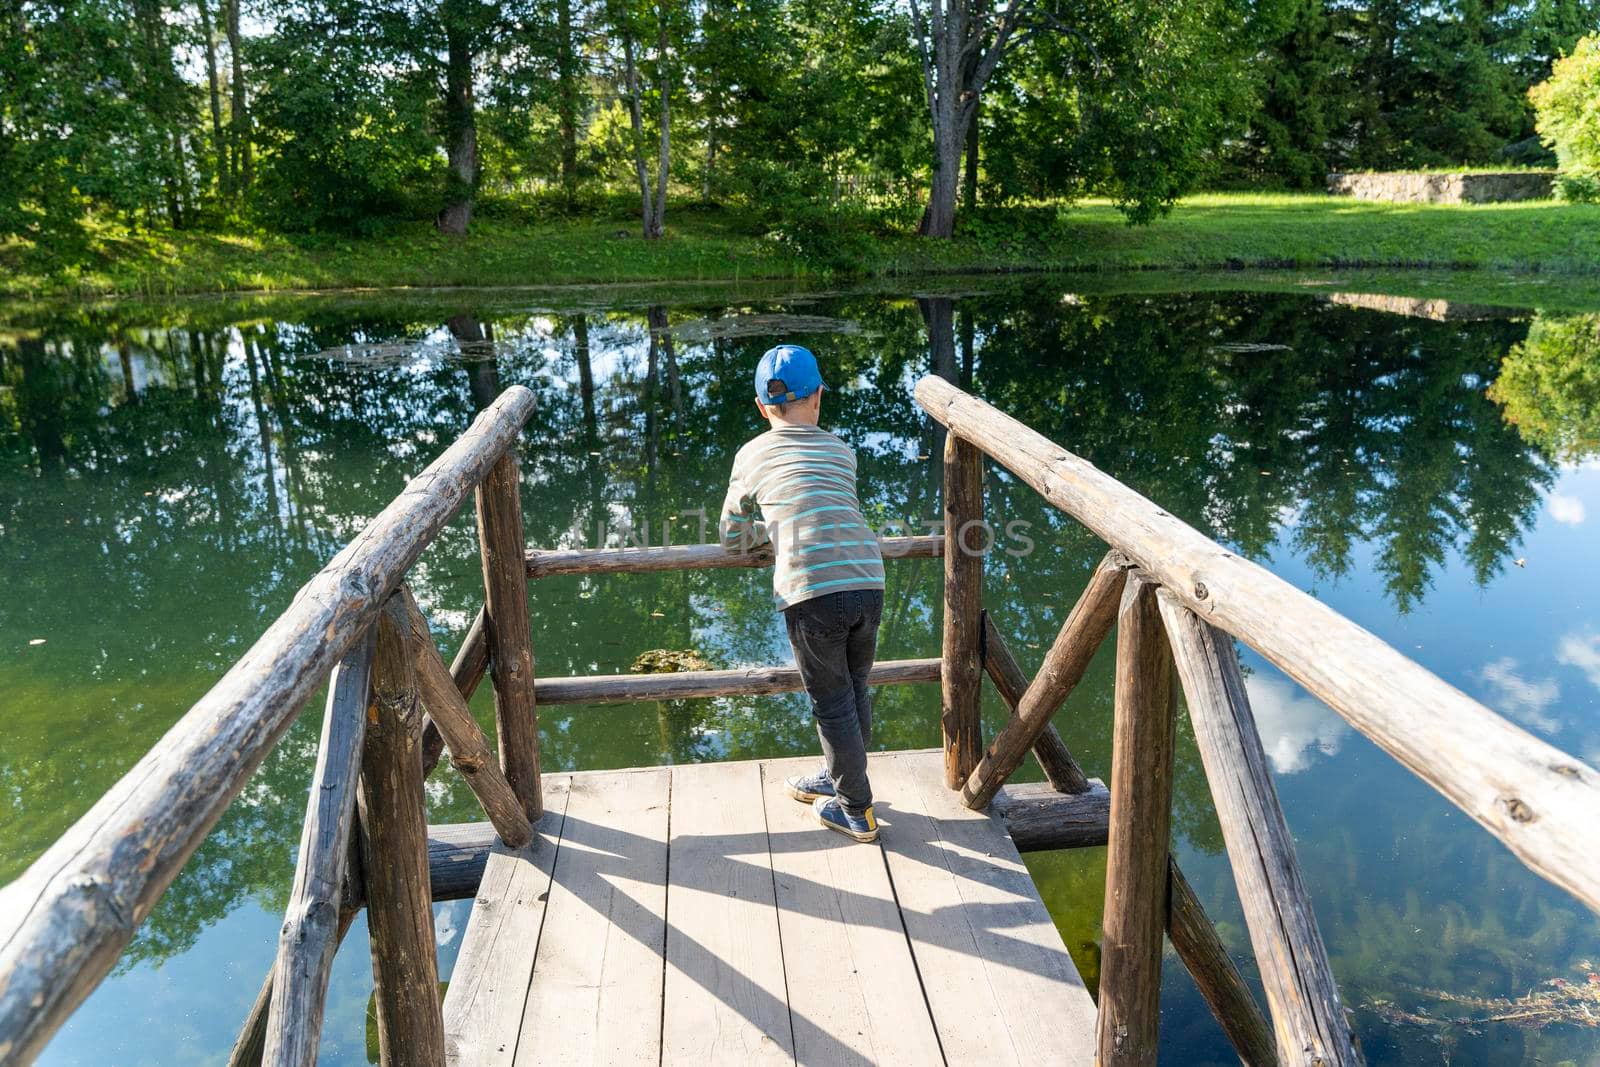 a preschooler boy is resting, leaning on the wooden bridges of the pond, walking through the nature park. A child is resting on a wooden bridge. The joys of childhood